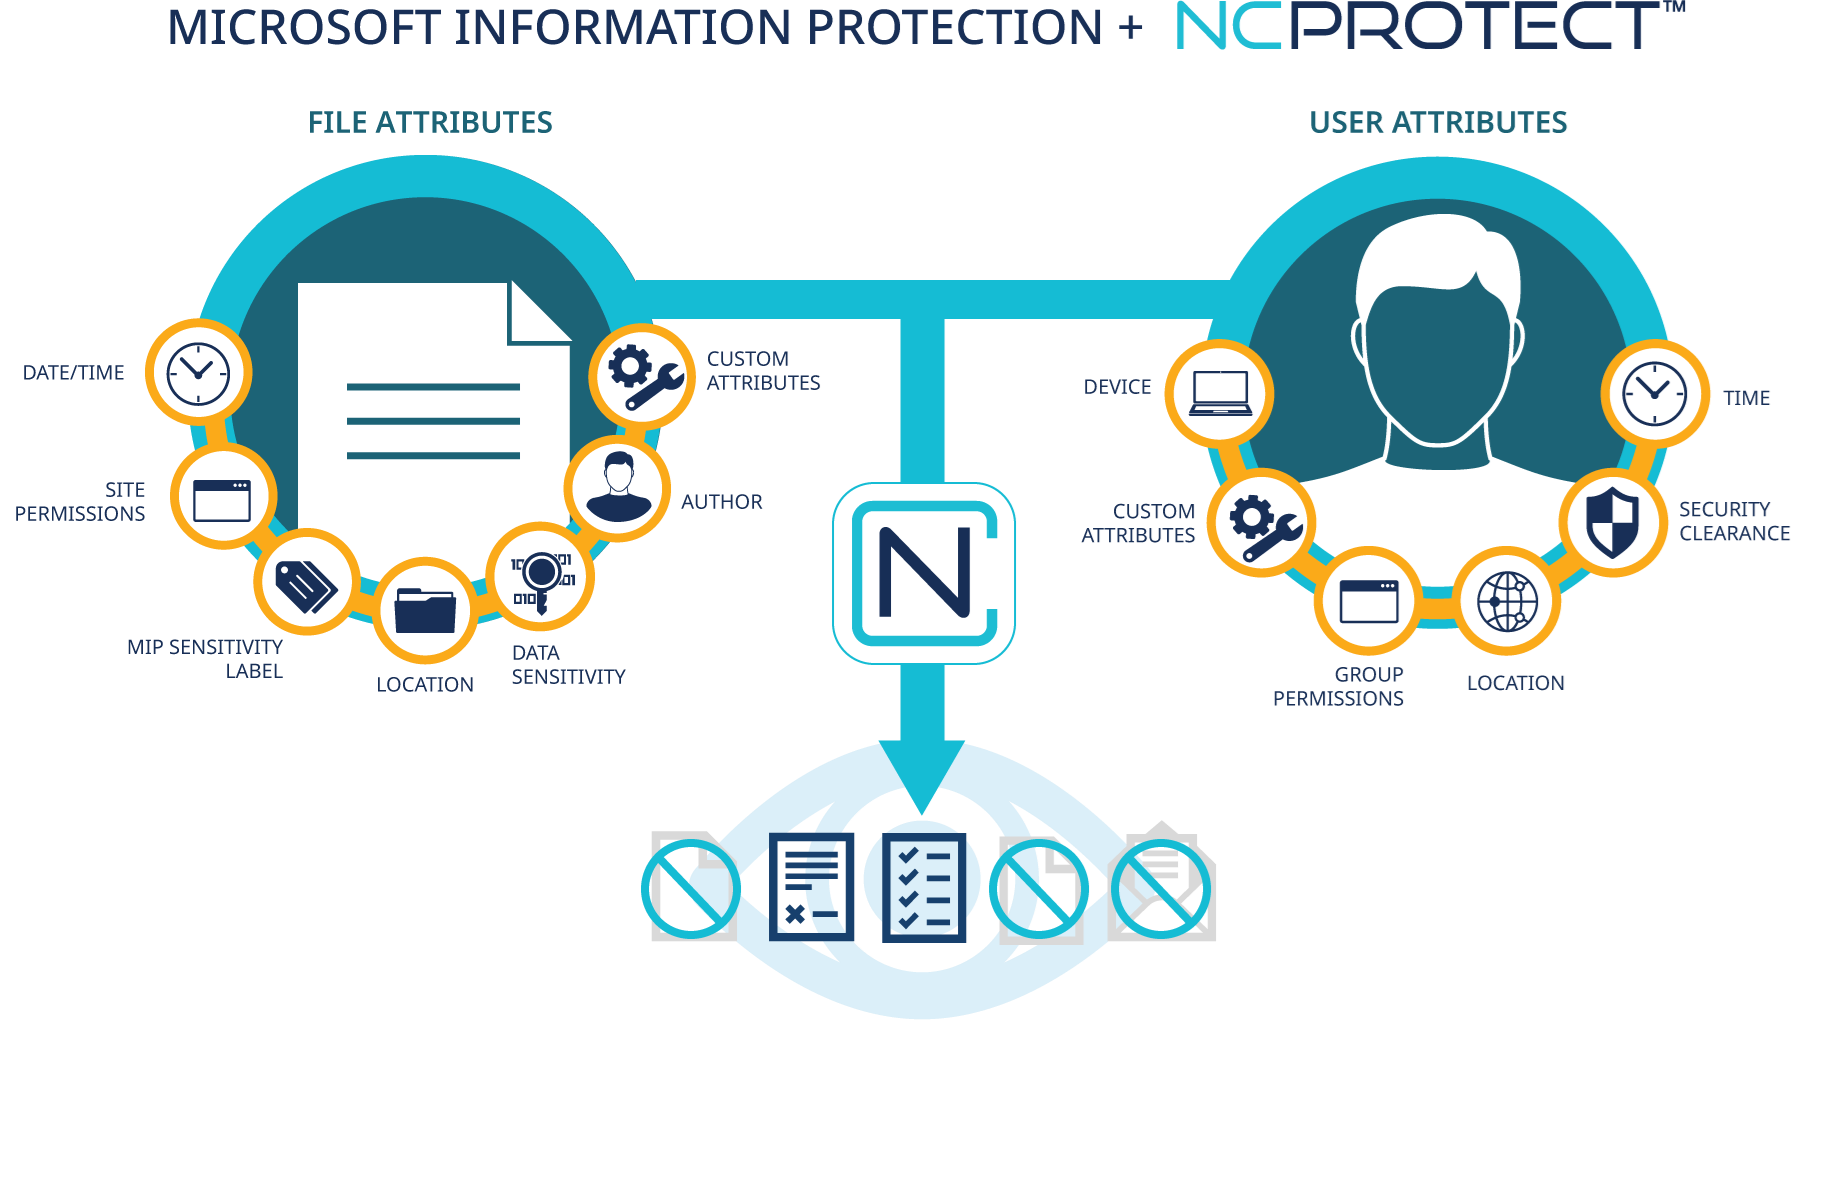 Image demonstrating the integration with NC Protect and Microsoft Information Protection. 